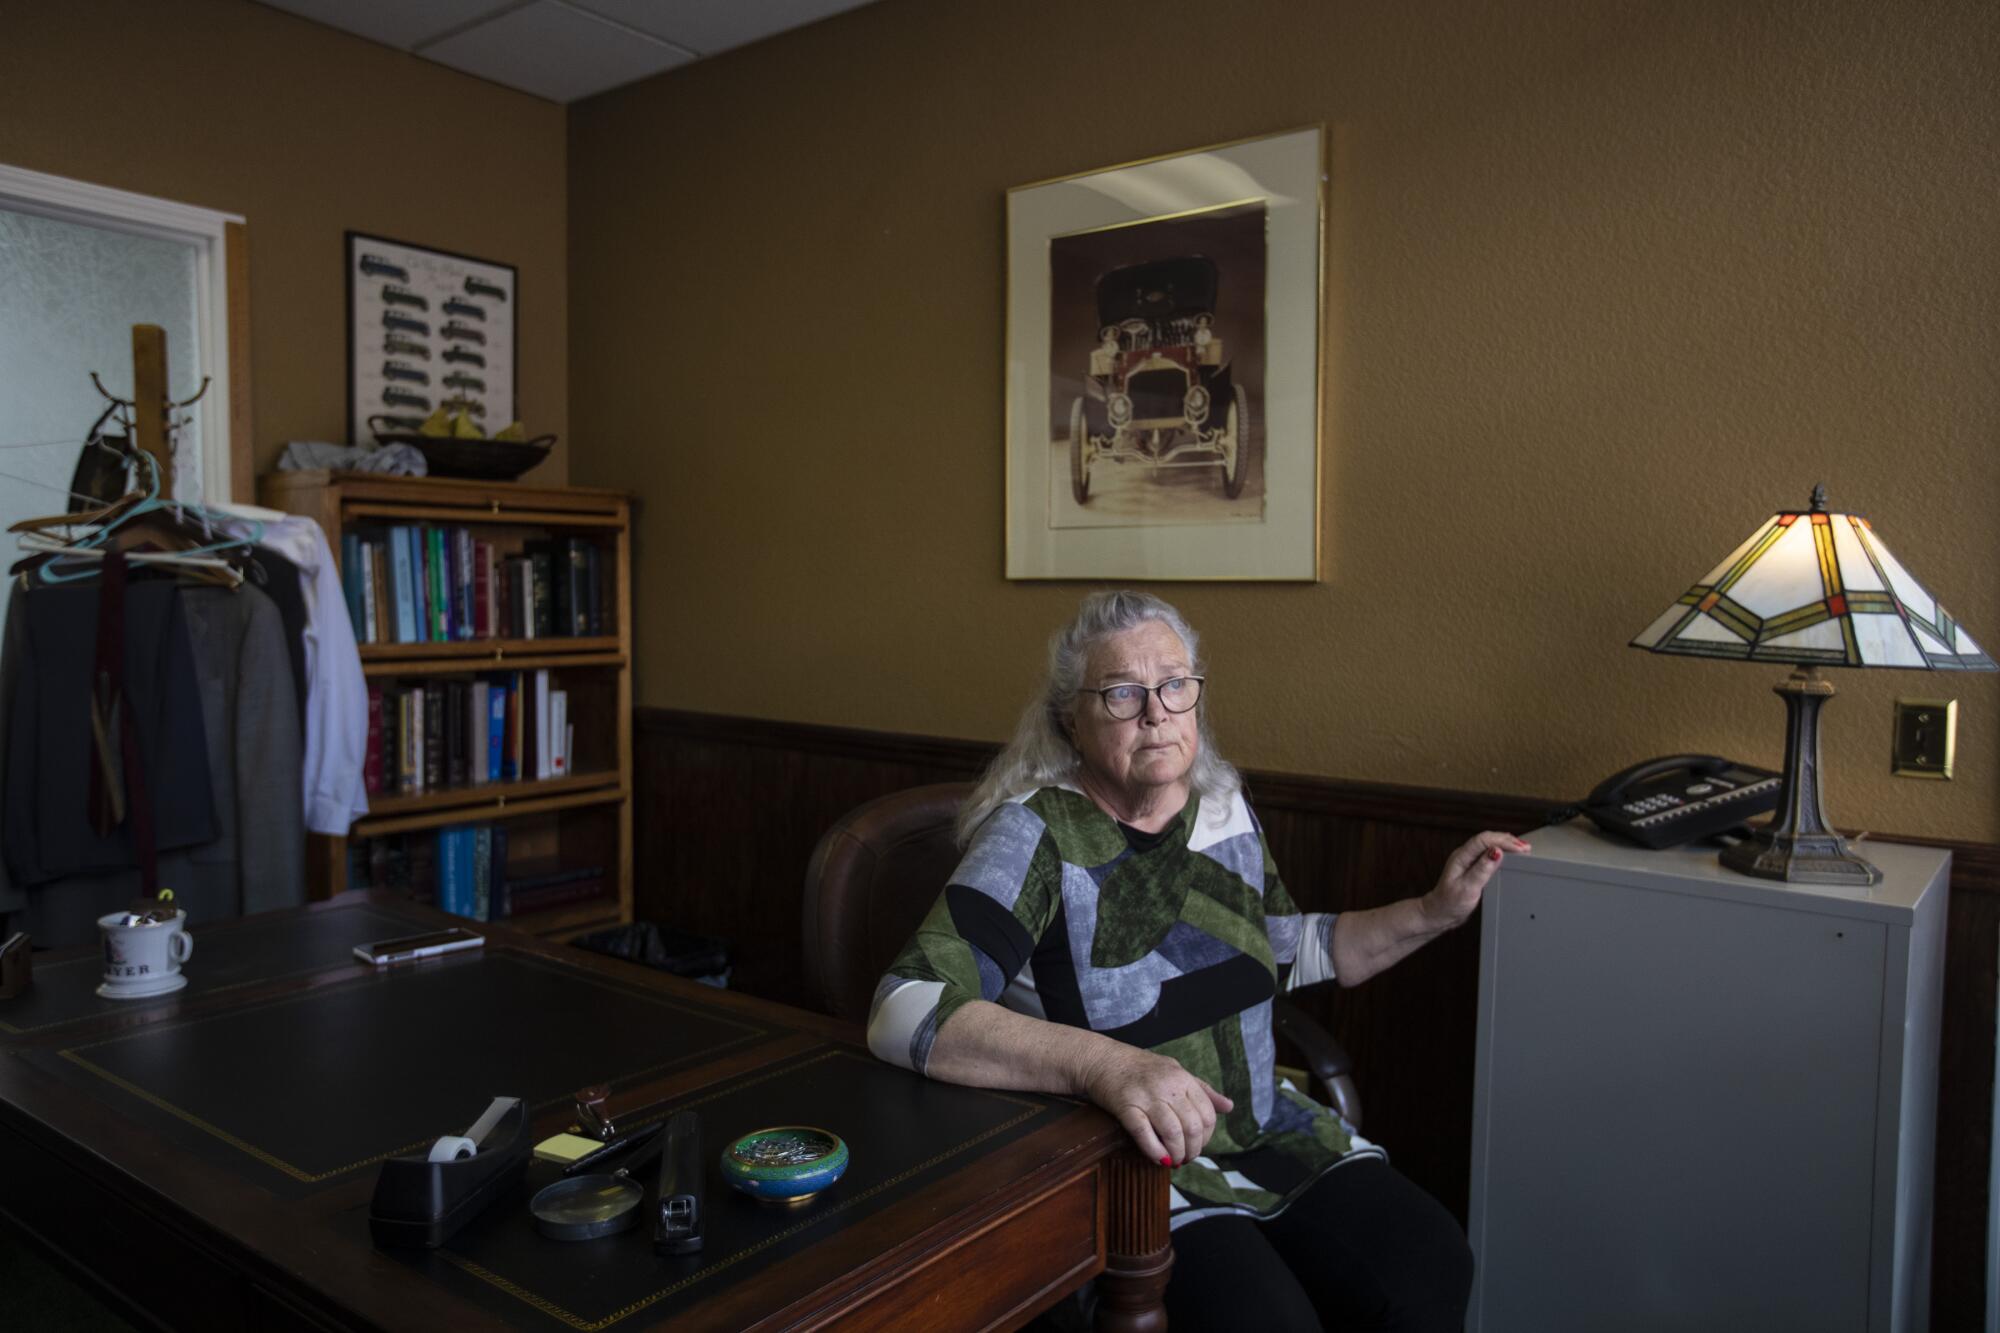 Georgia DeFilippo, wife of Frank Carson, sits at a desk in his office.